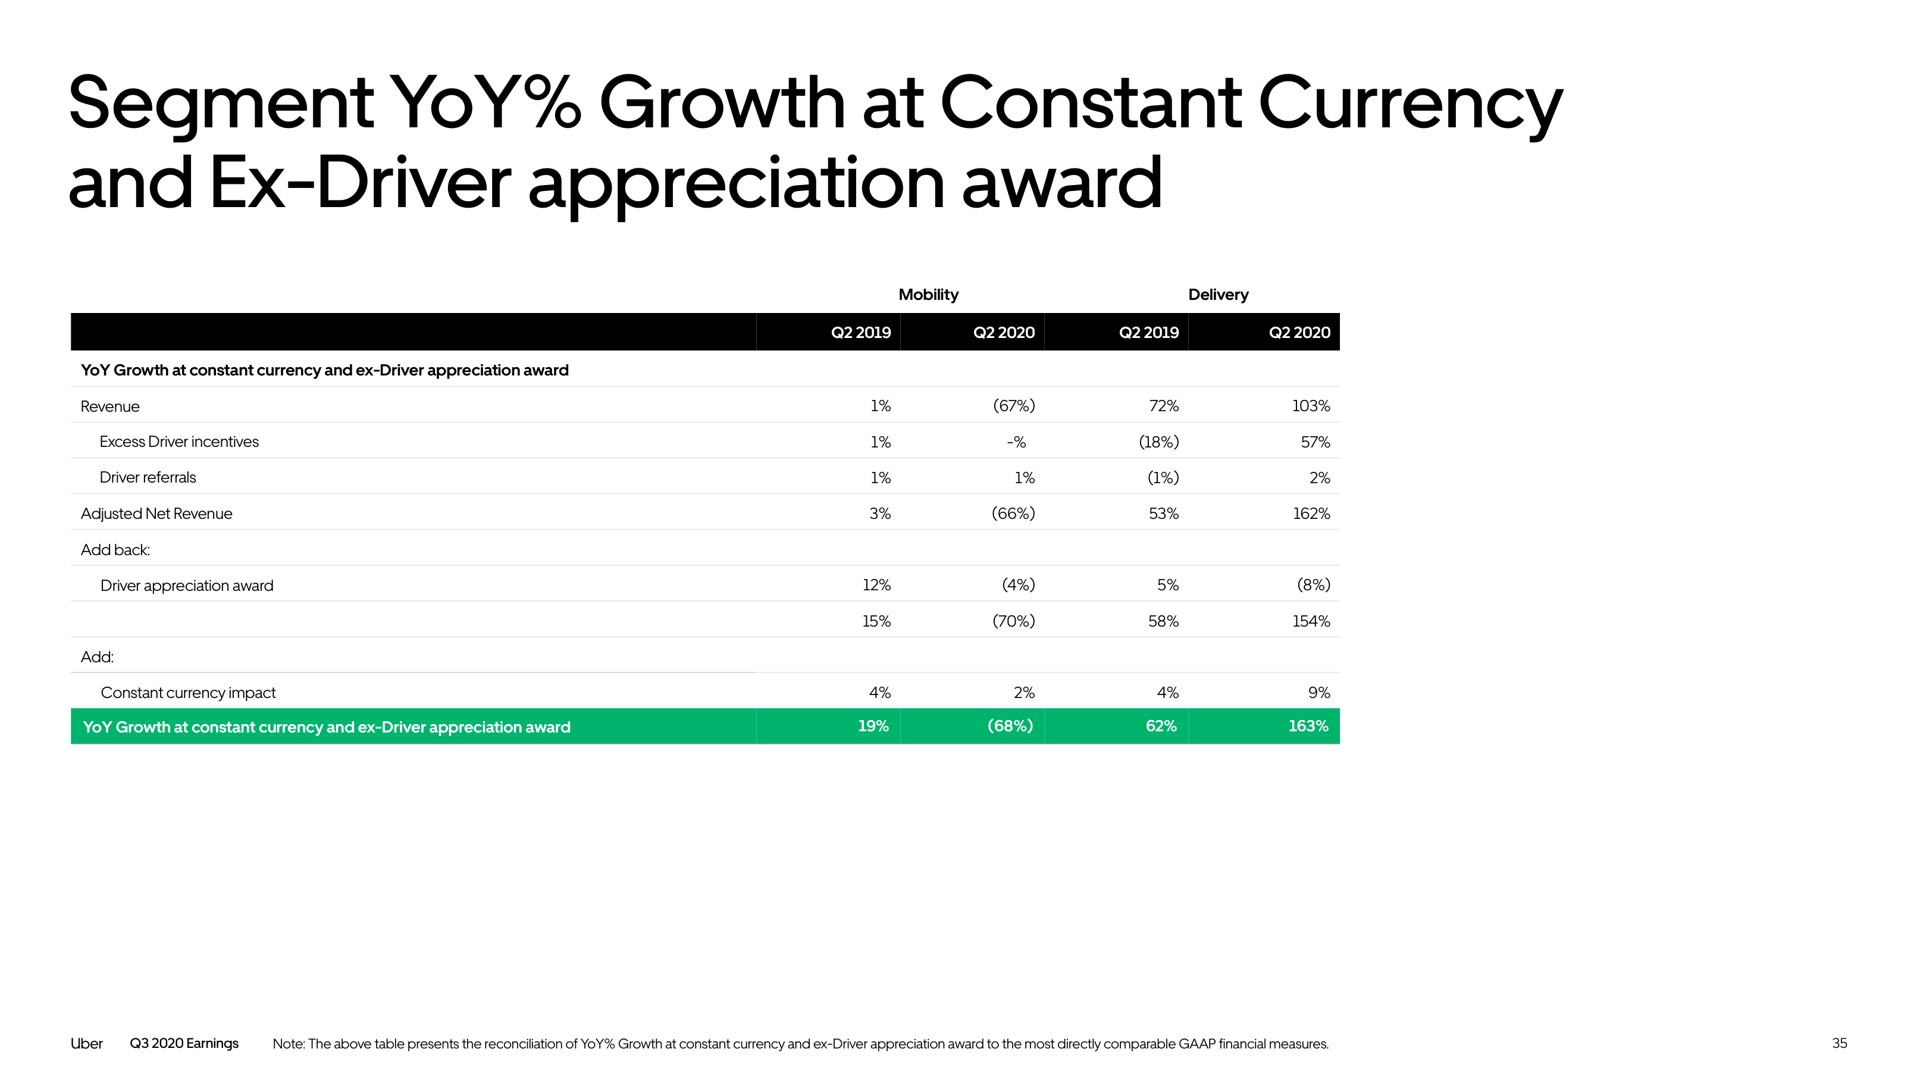 segment yoy growth at constant currency and driver appreciation award | Uber